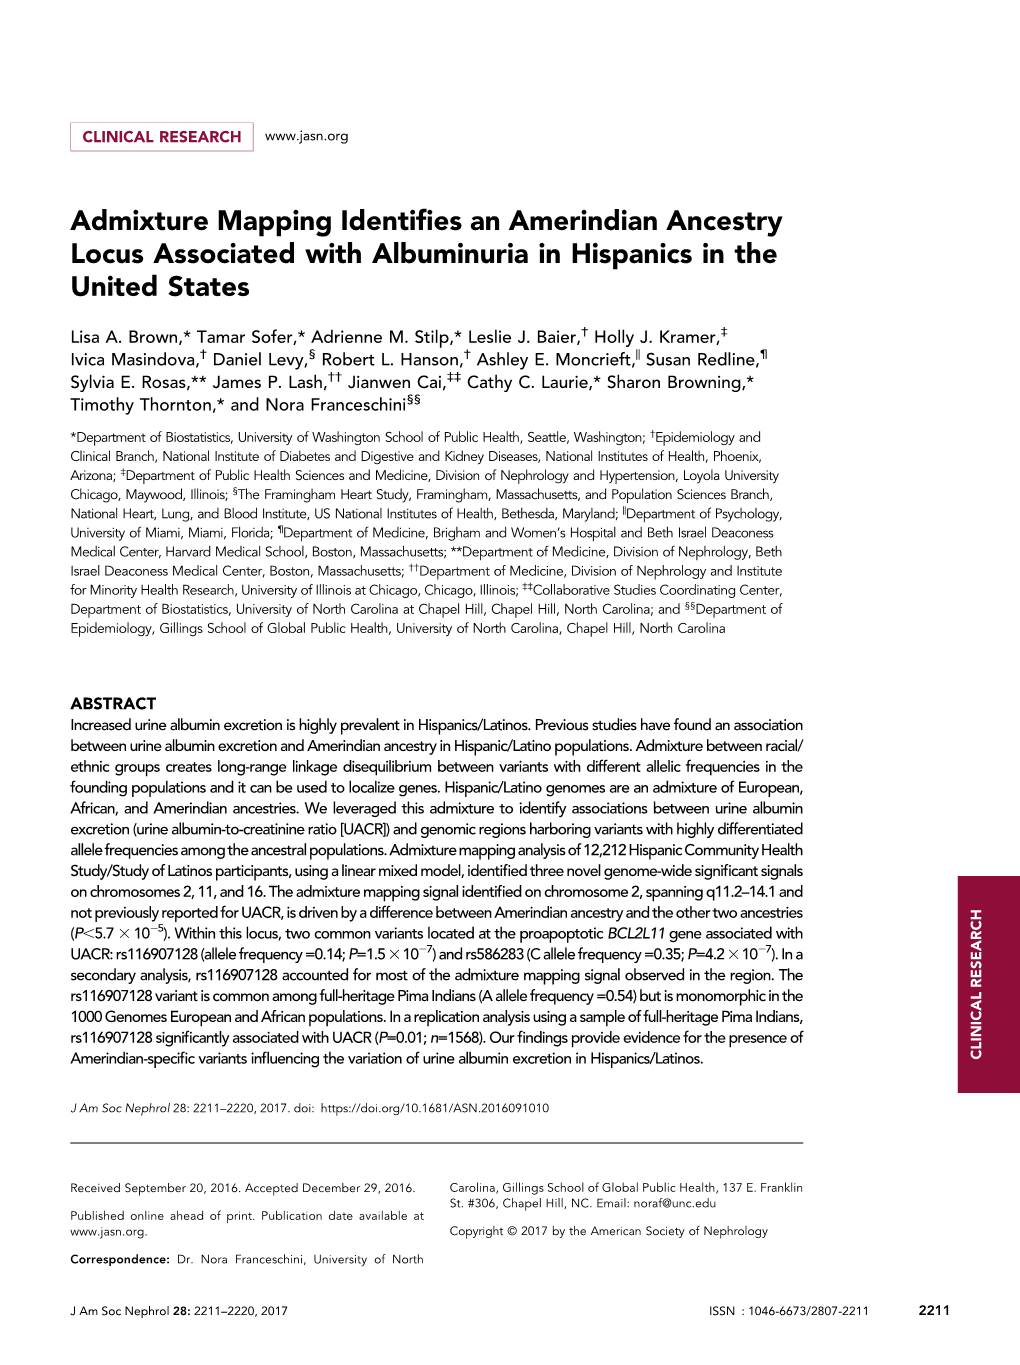 Admixture Mapping Identifies an Amerindian Ancestry Locus